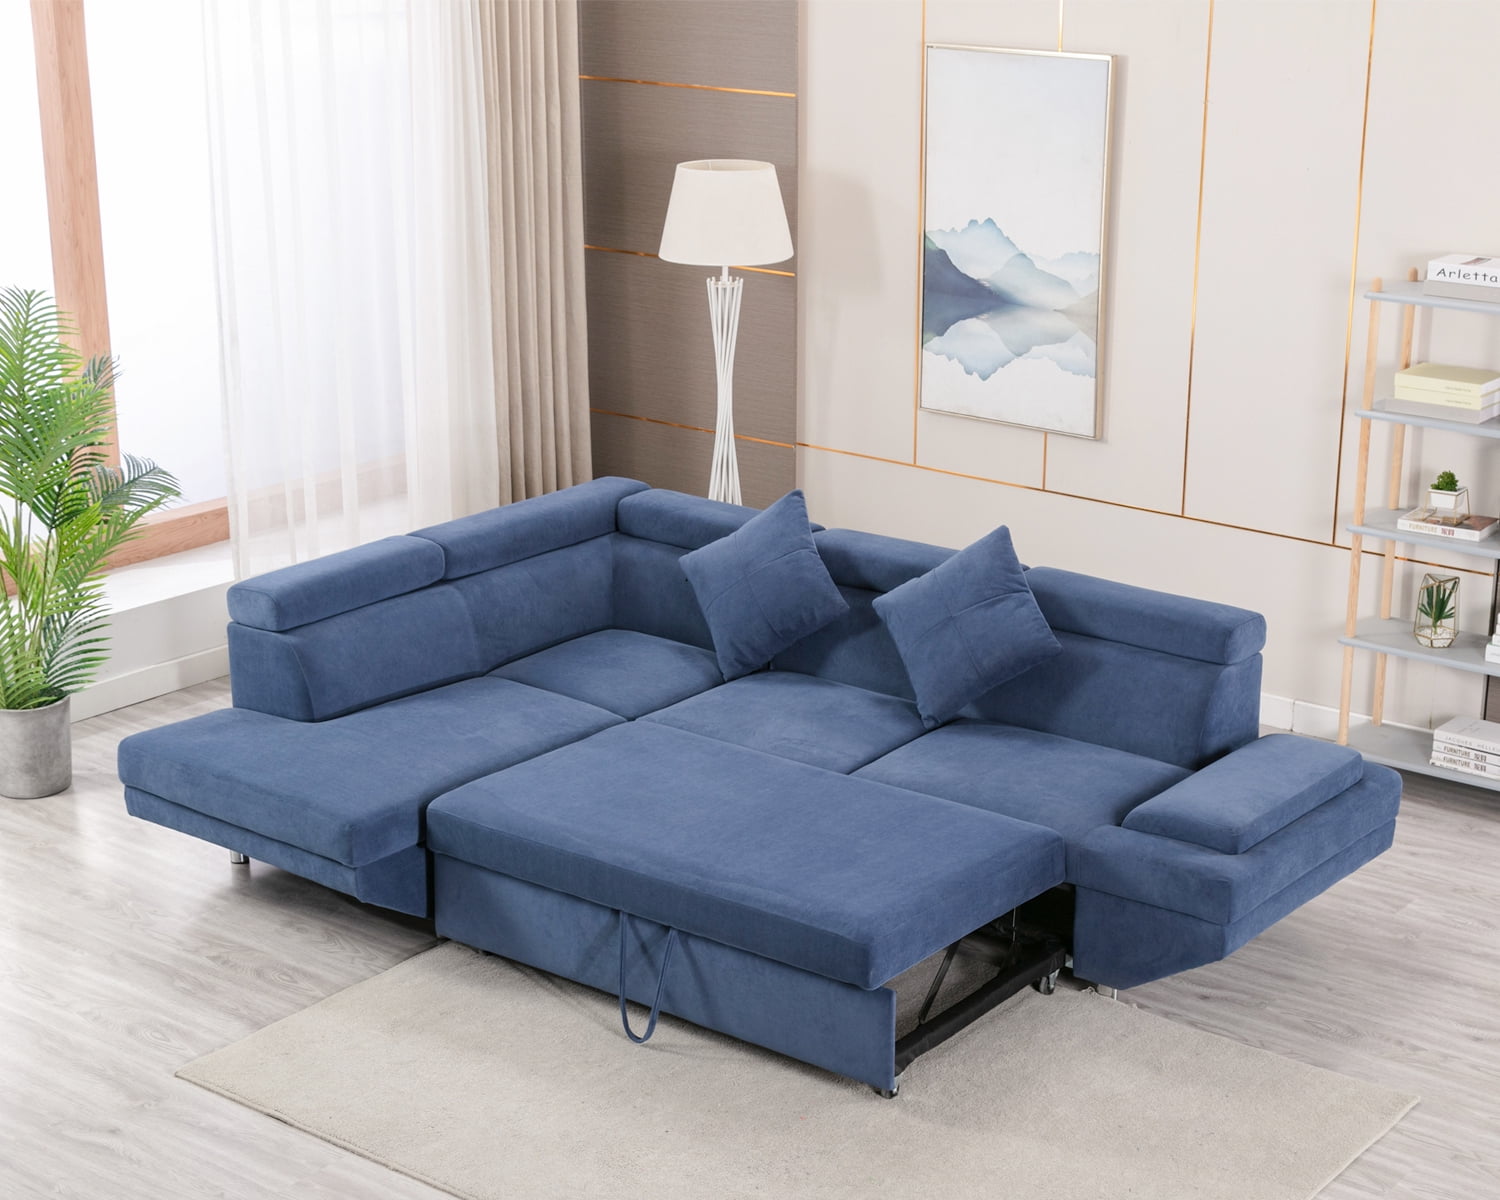 living room furniture with futon